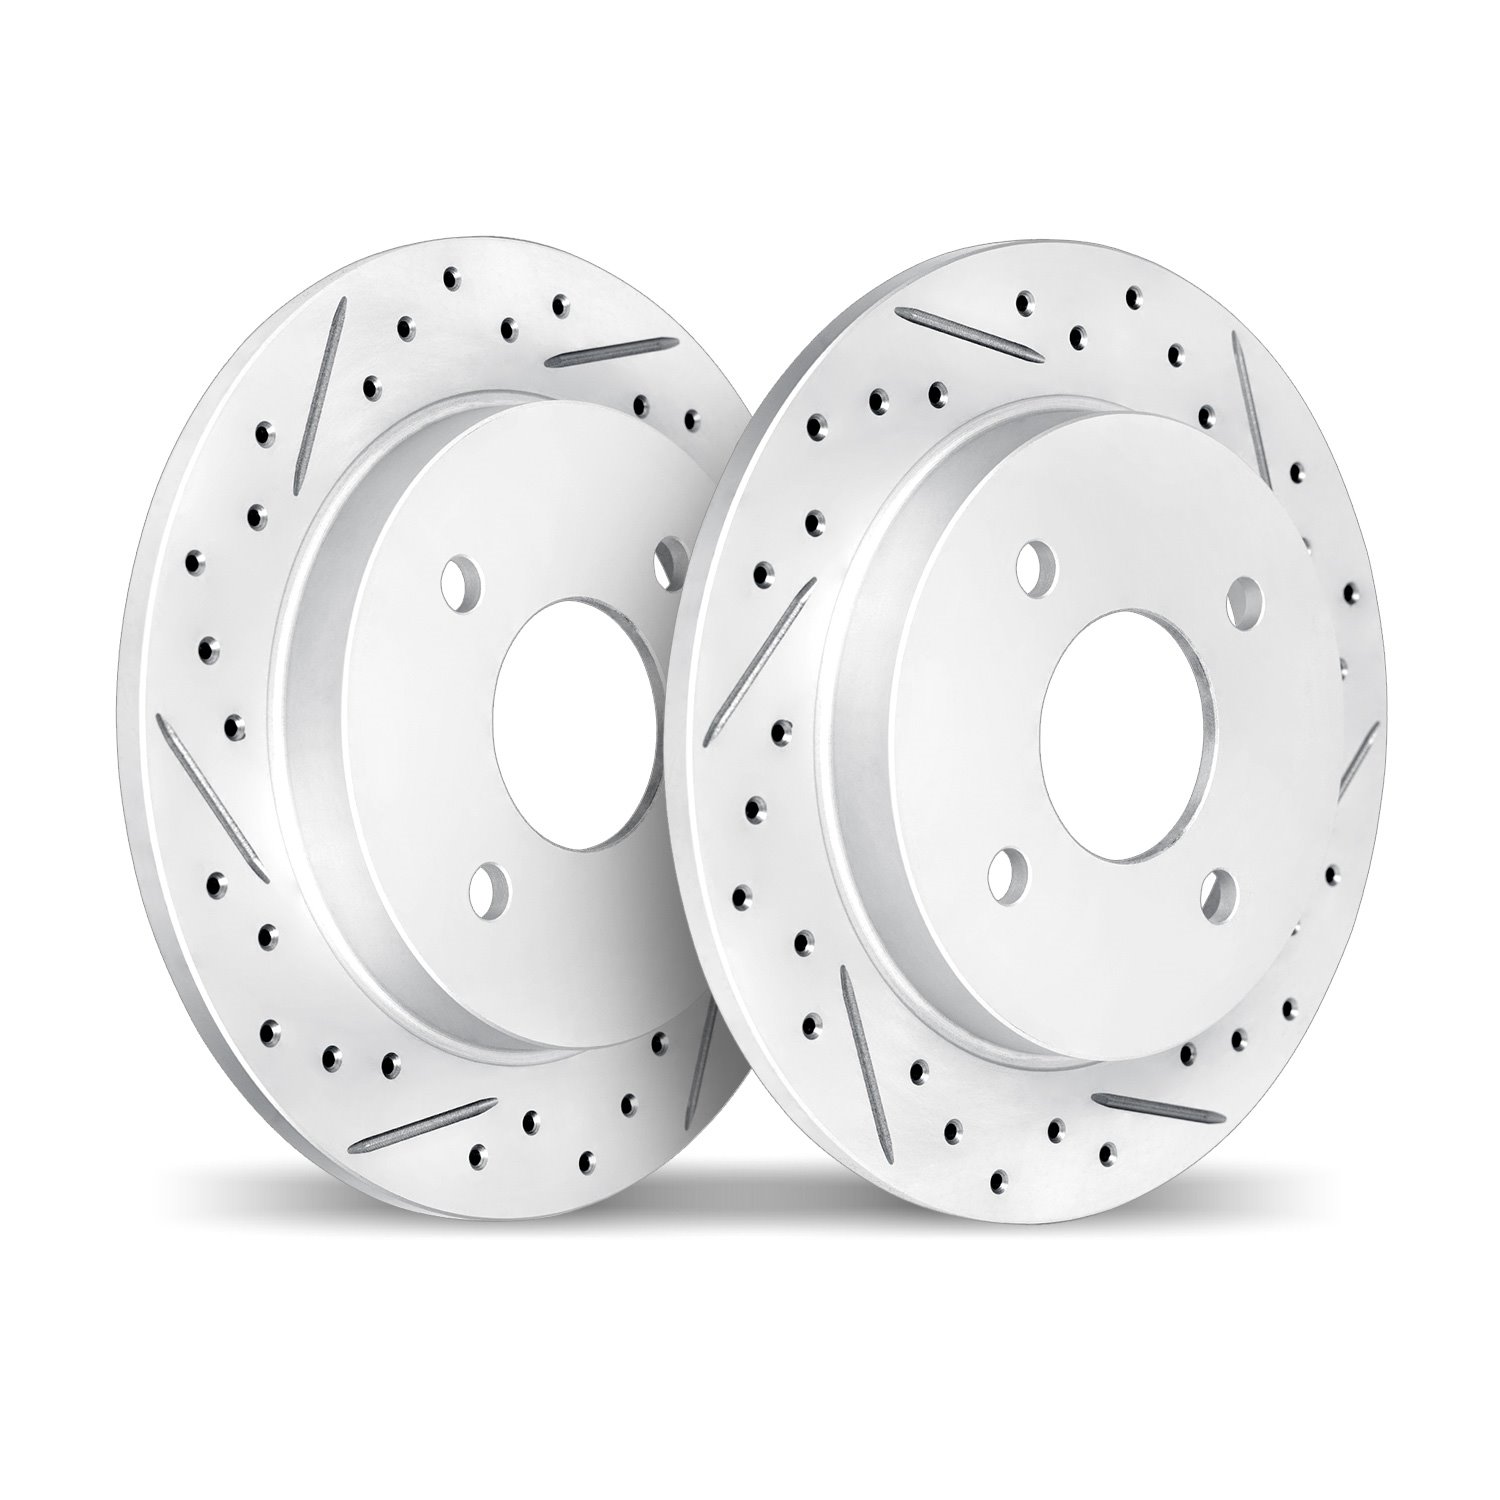 2002-76069 Geoperformance Drilled/Slotted Brake Rotors, 2012-2018 Lexus/Toyota/Scion, Position: Rear